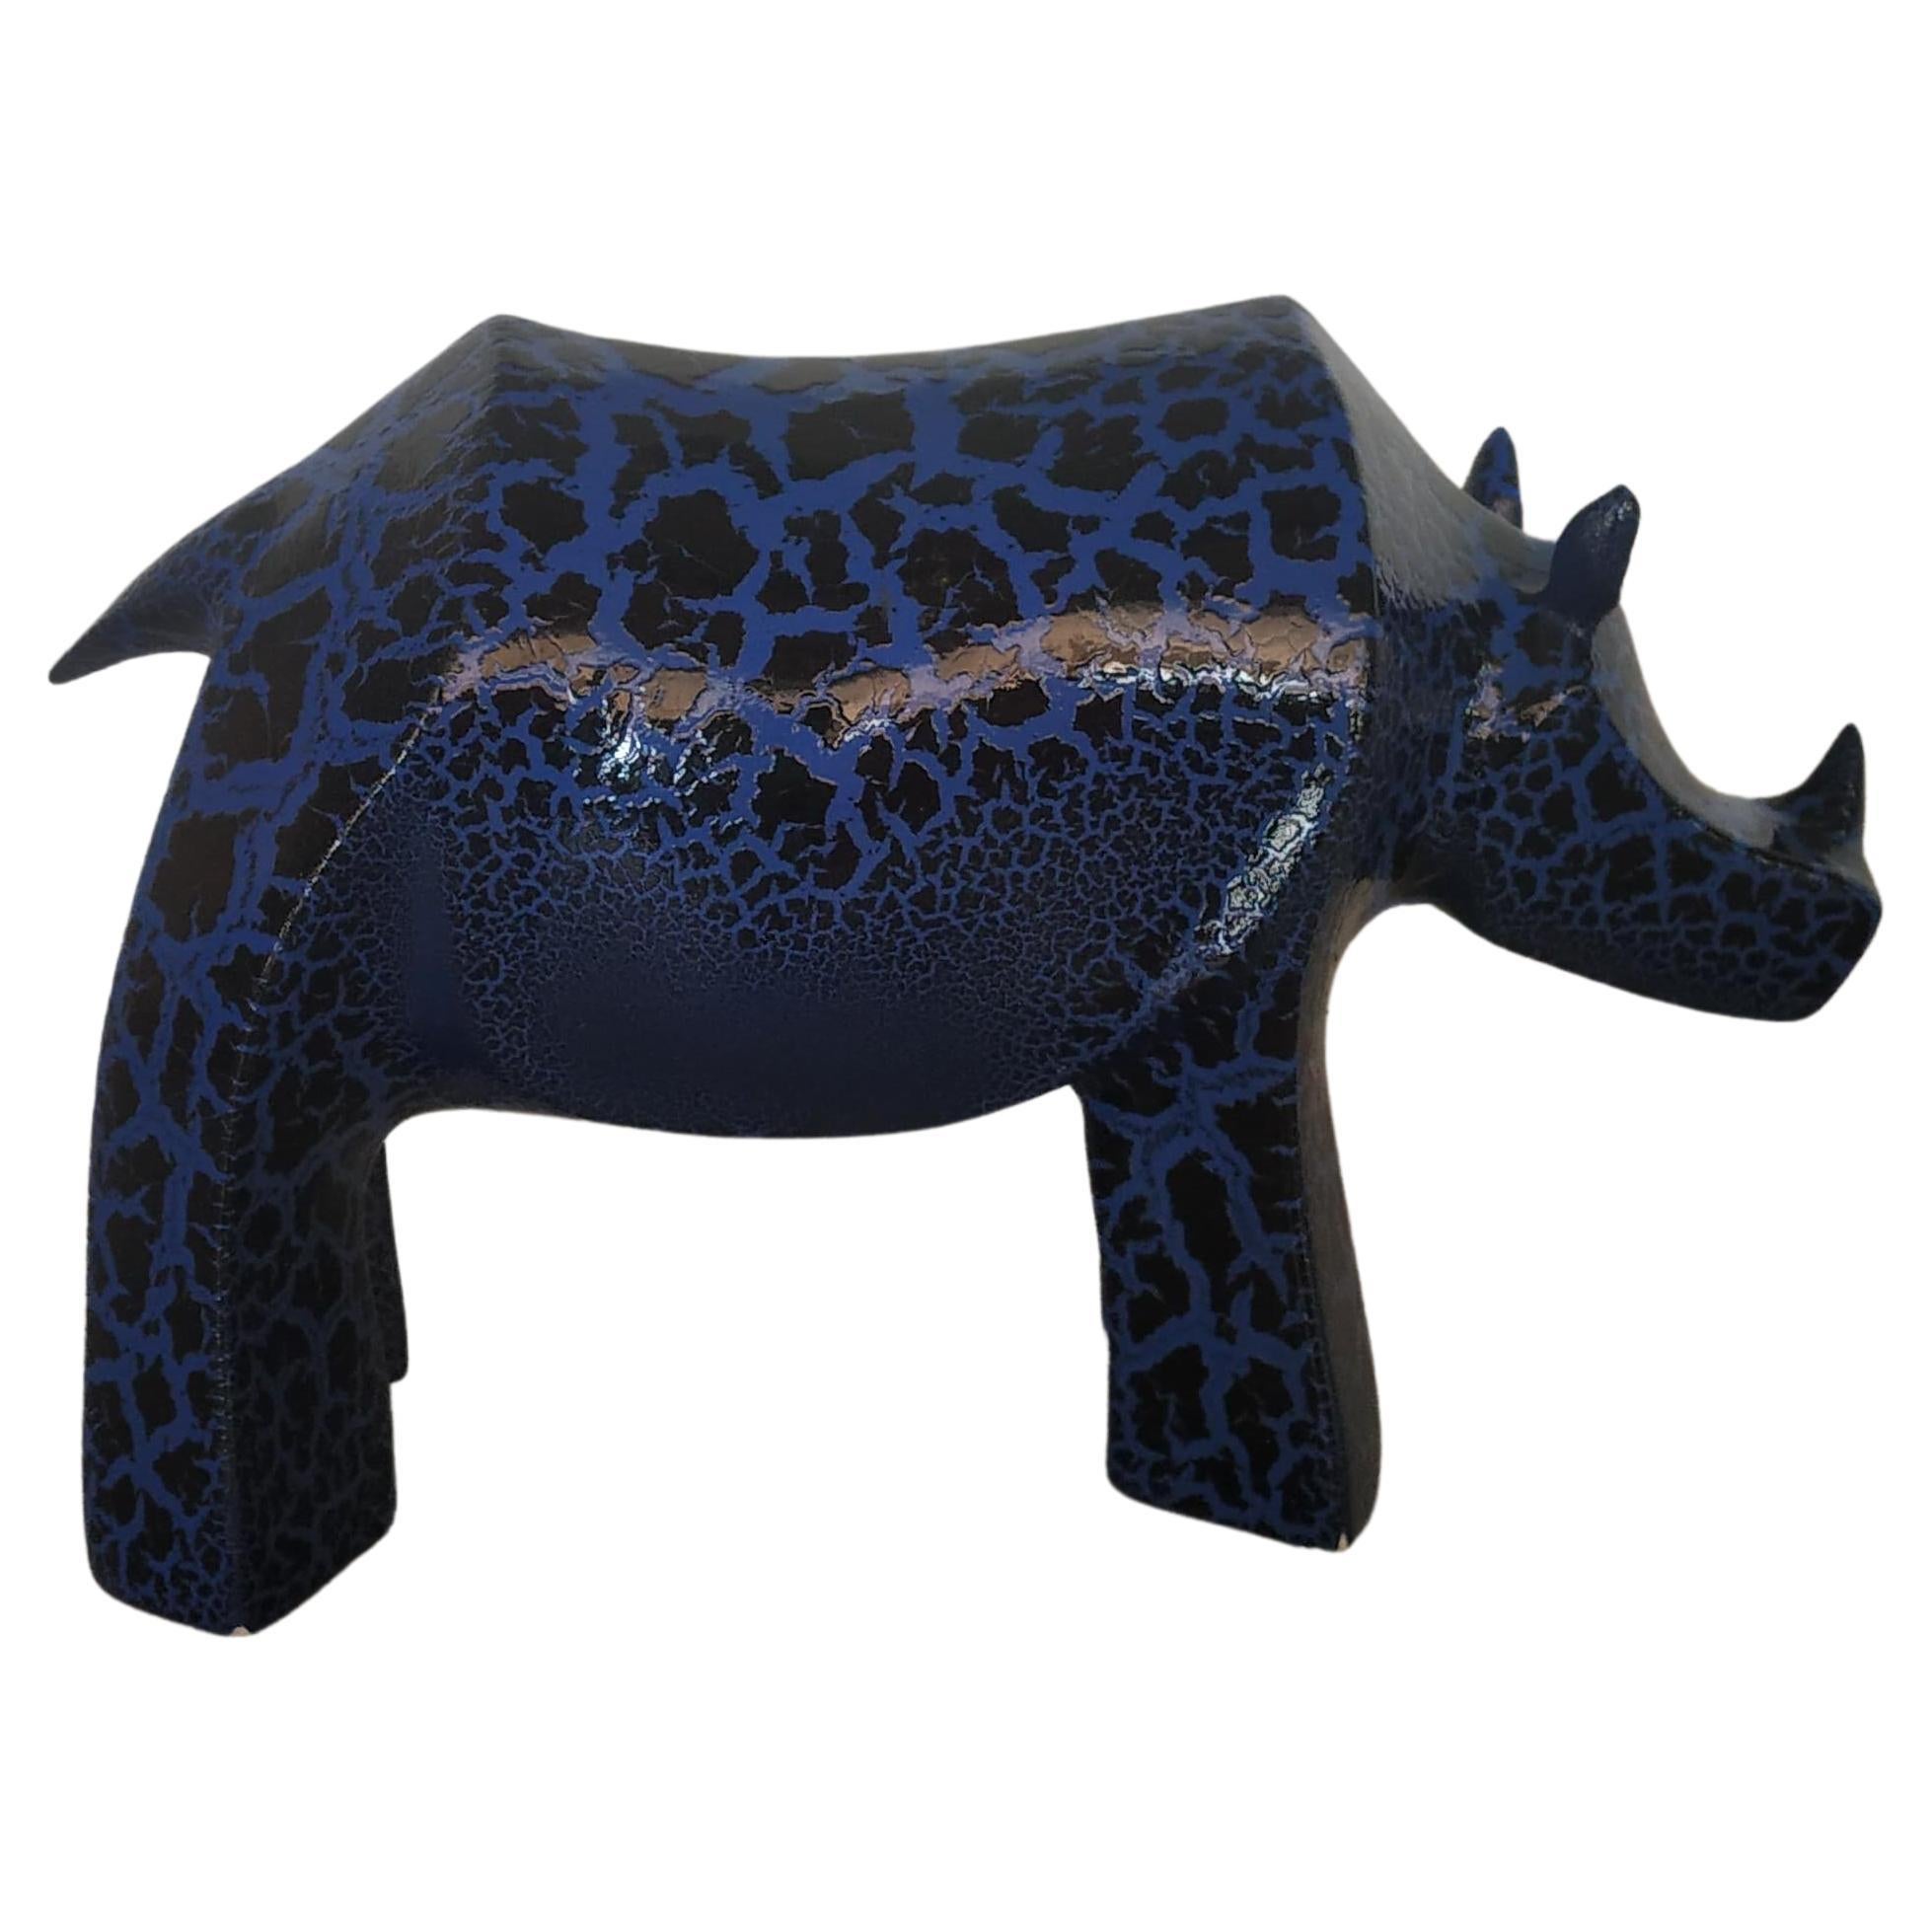 The Fiberglass crackled Rhino Sculpture by Kunaal Kyhaan is part of a collection of sculptures that are inspired by Indian mythology and by exotic animals that are indigenous to India. 
Each animal is hand cast and reinterpreted into